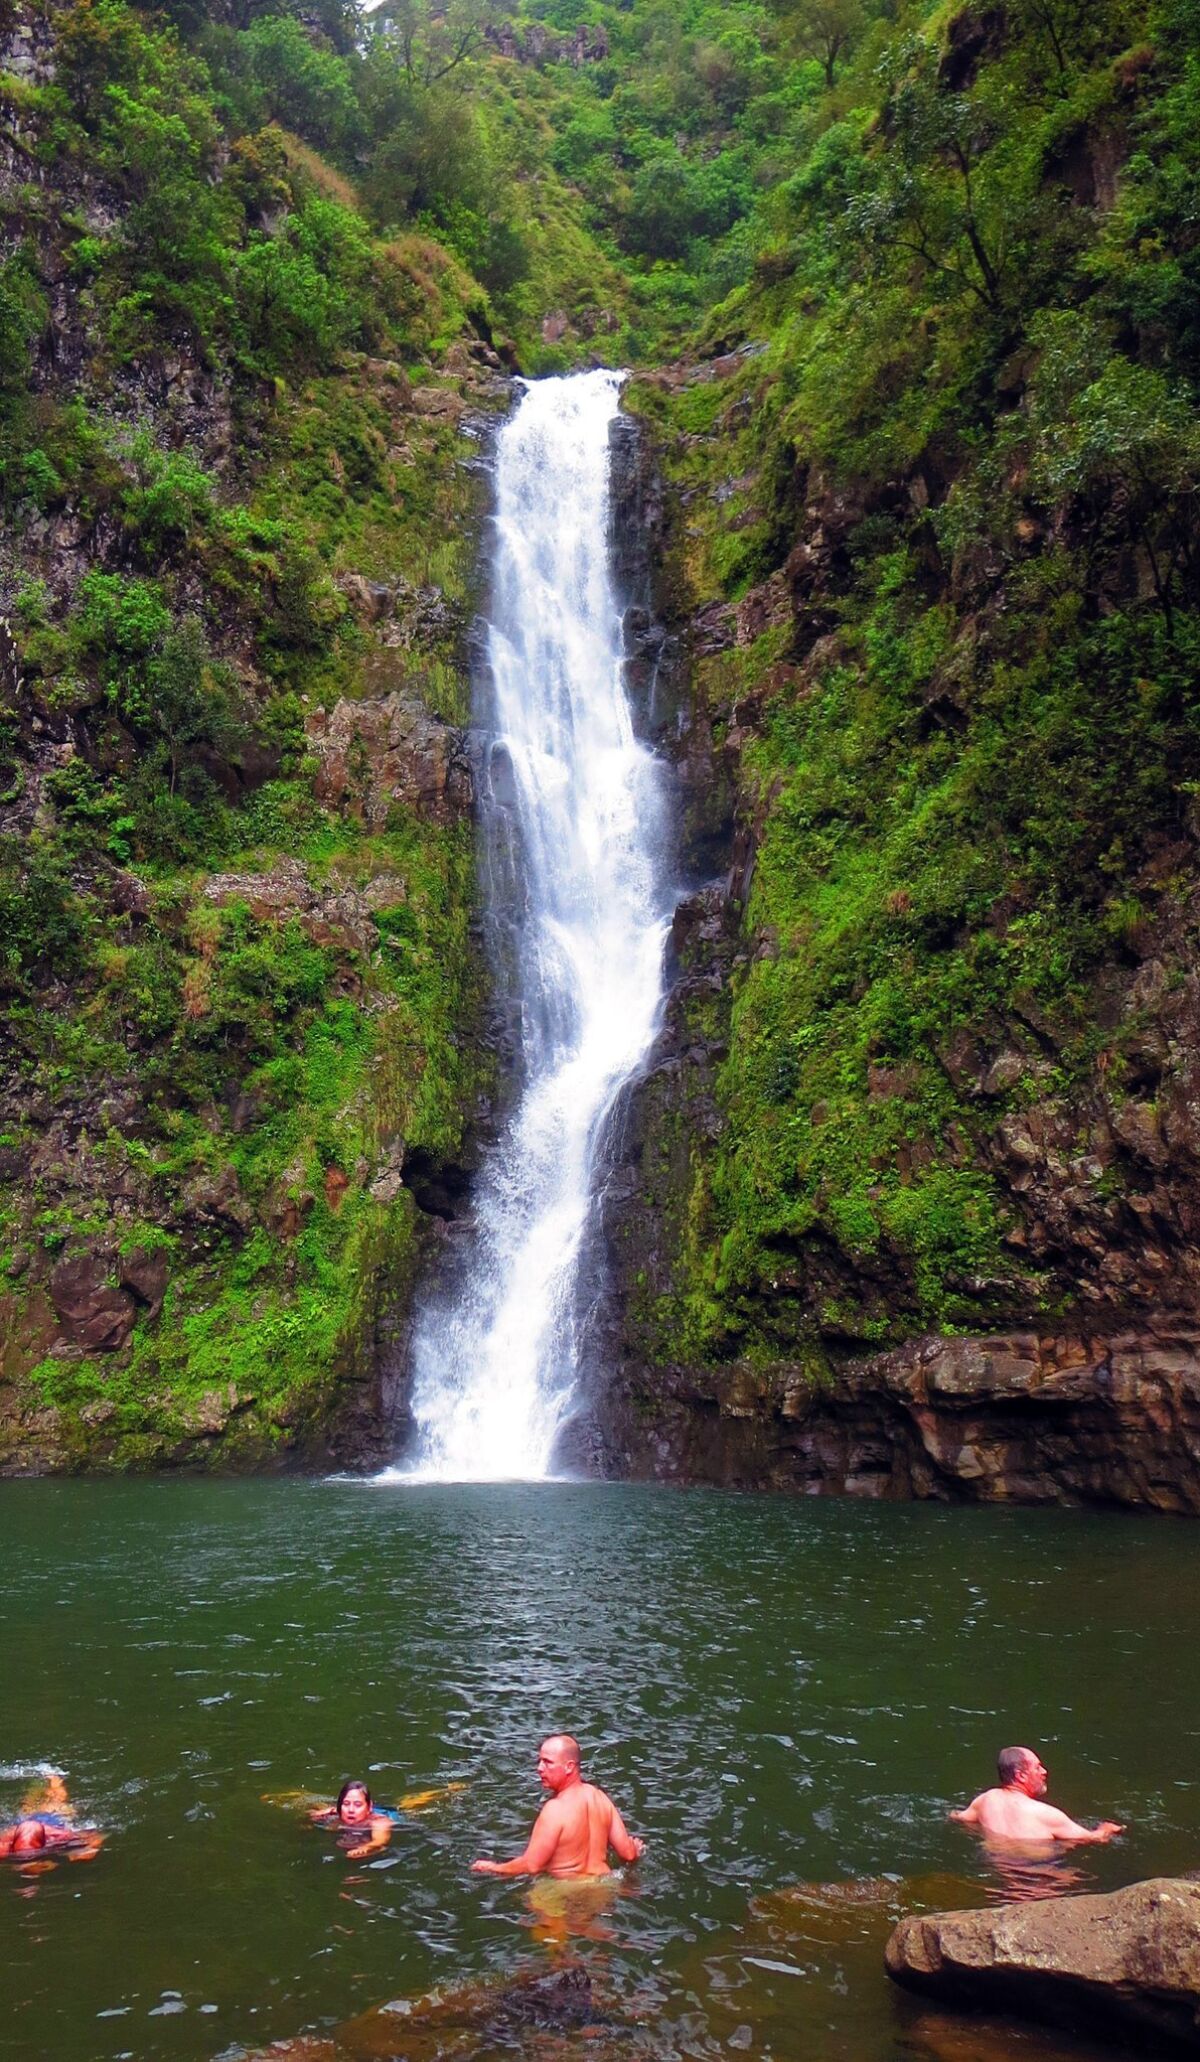 Only the bottom third of Mo’oula Falls in the Halawa Valley on Moloka’i can be seen from the pool at its base. After a long hike through the jungle, the chilly water is quite refreshing. Wendy Lemlin